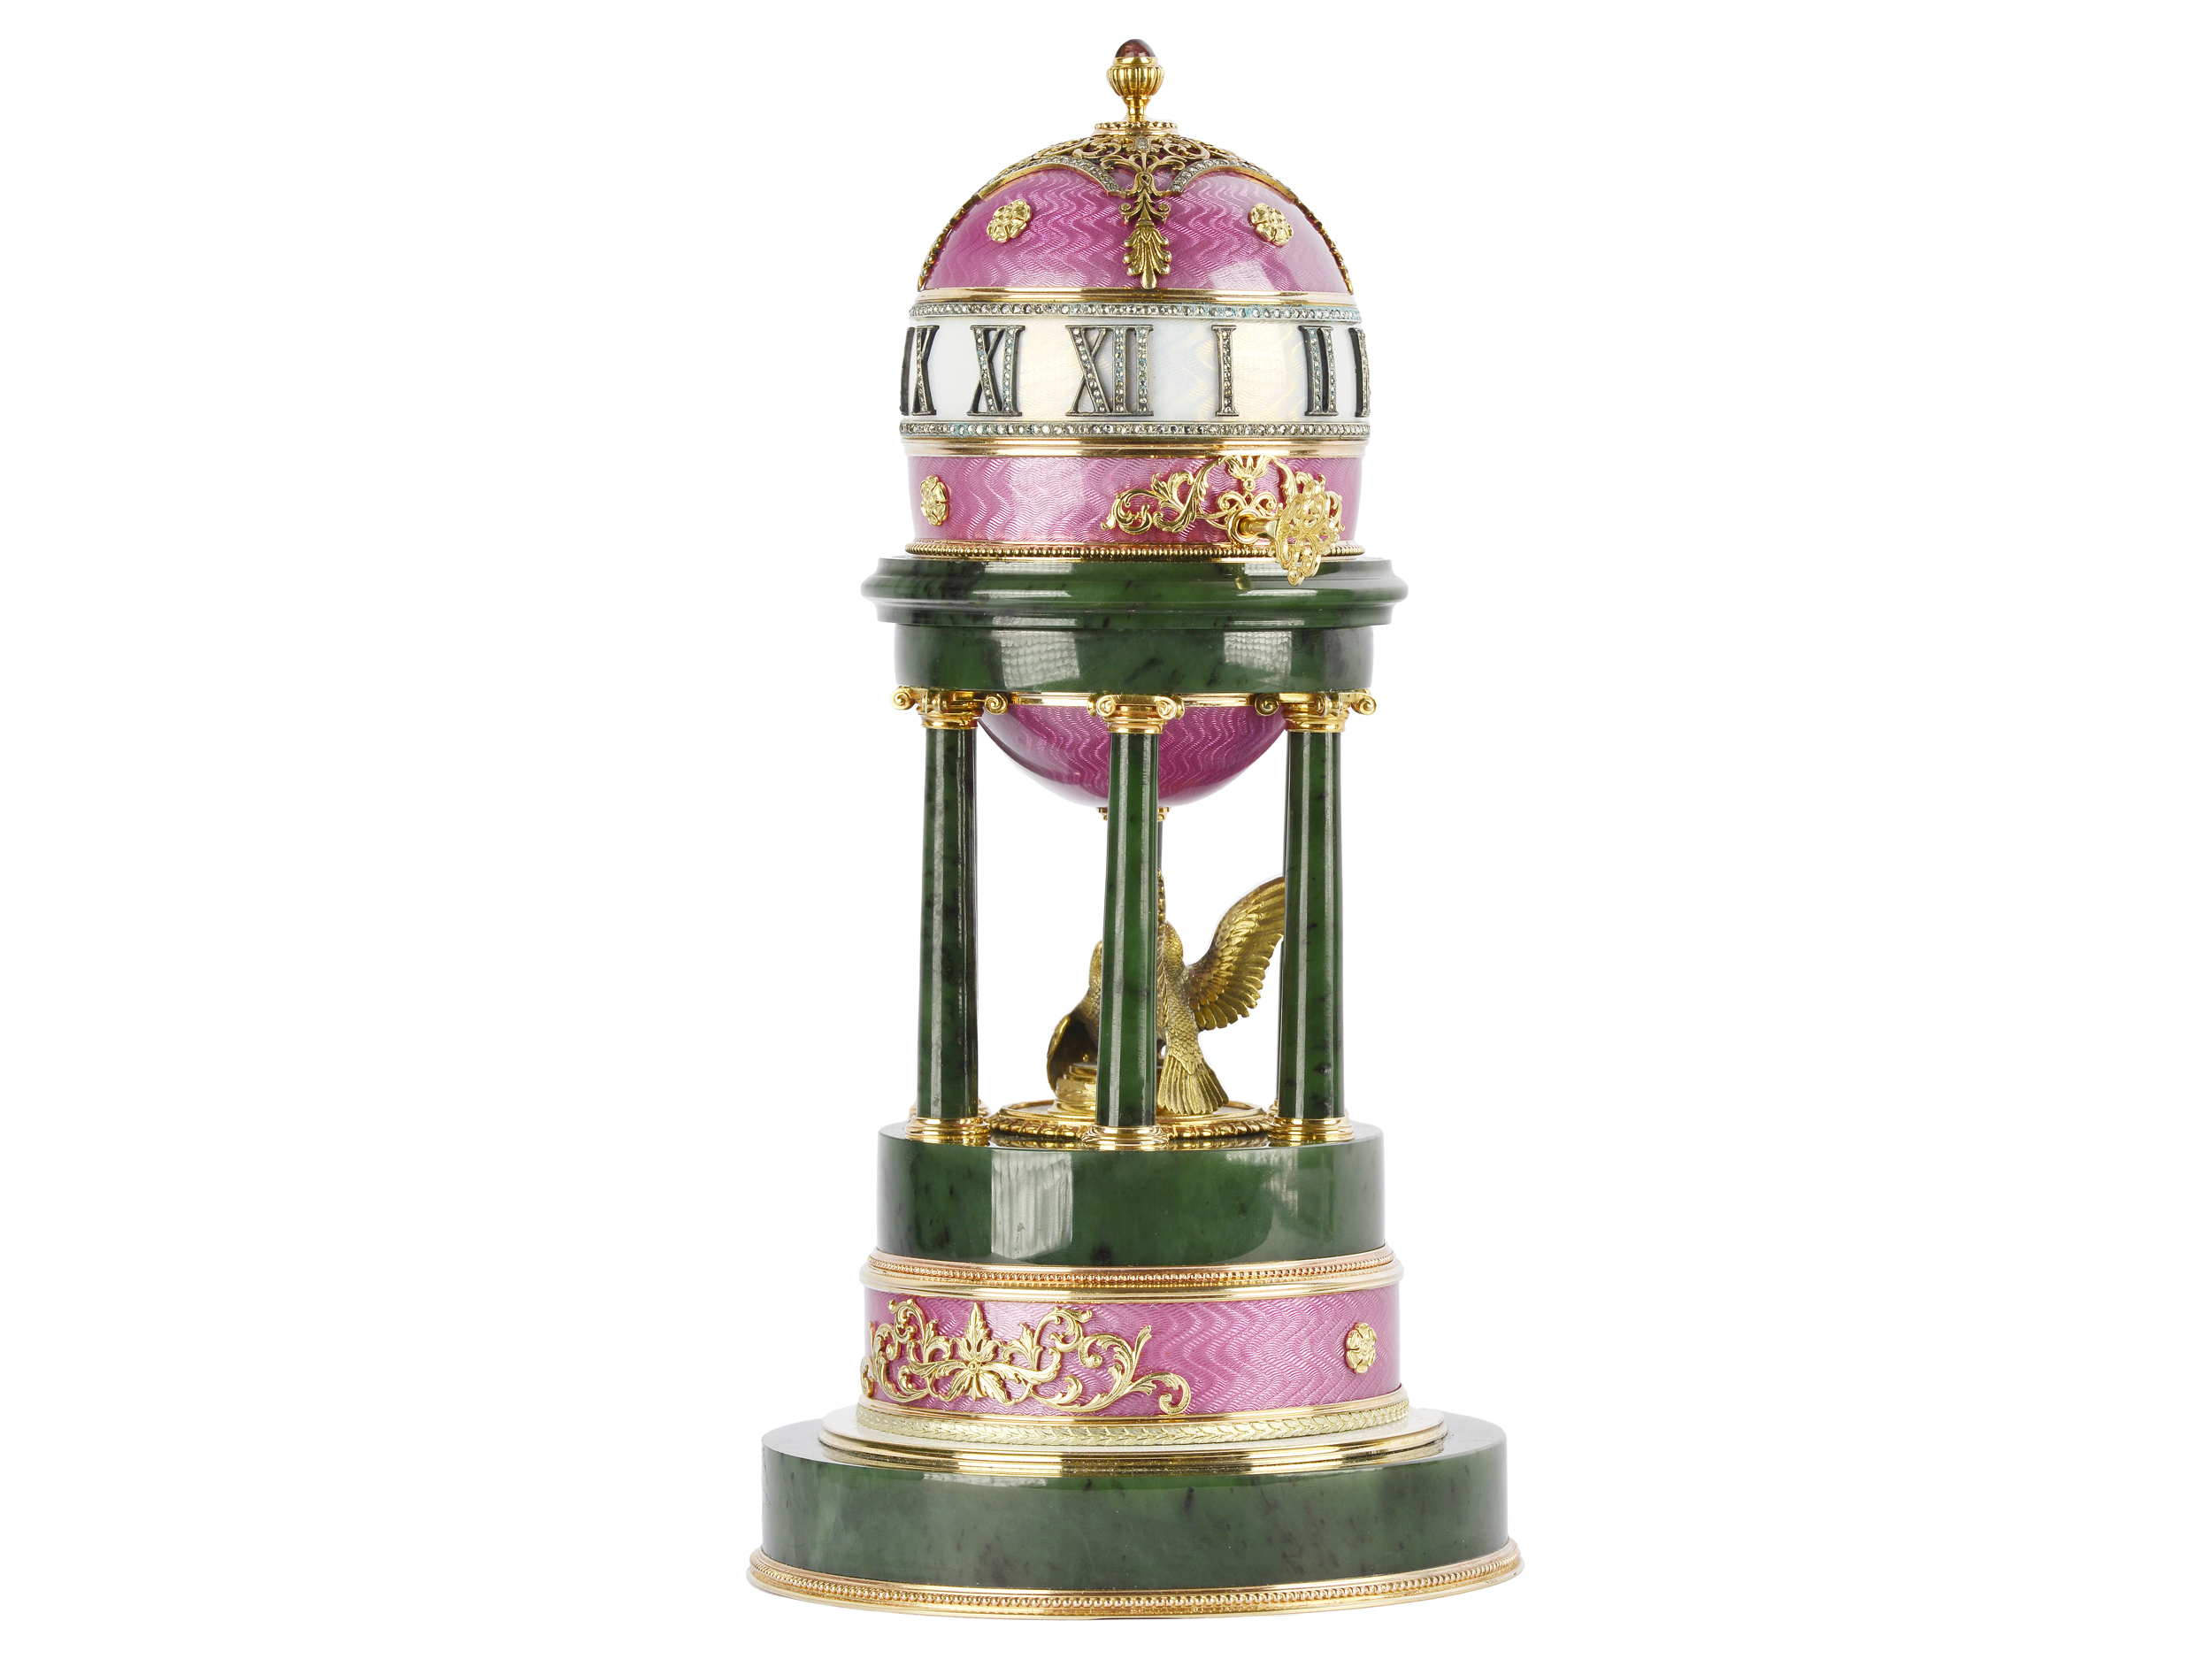 A highly significant unique colonnade clock in the style of Peter Carl Fabergé, Saint Petersburg 184 - Image 3 of 17